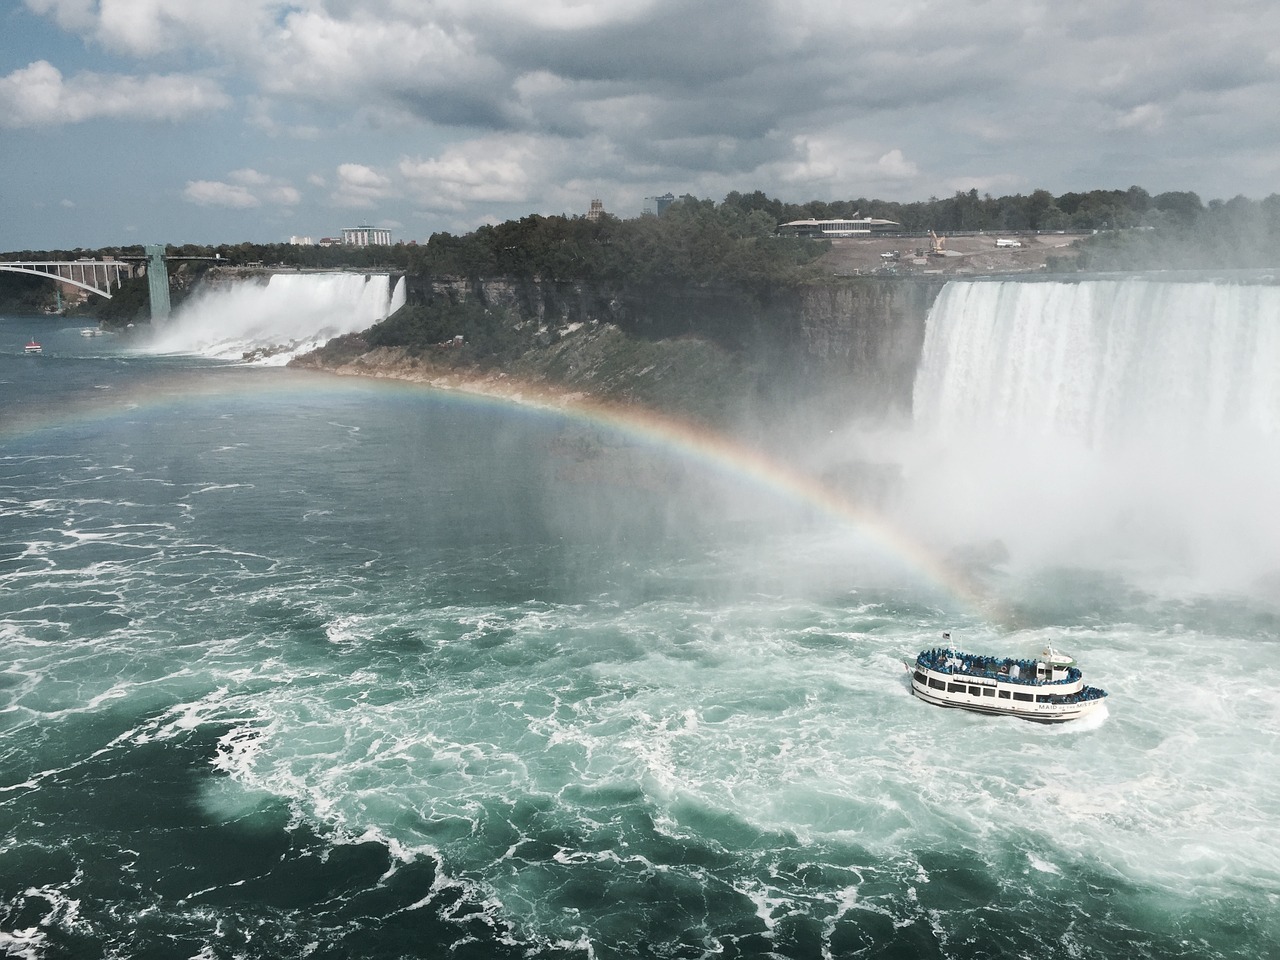 This travel guide to Niagara Falls will help you get the most out of your stay there ... photo by CC user yesika on pixabay